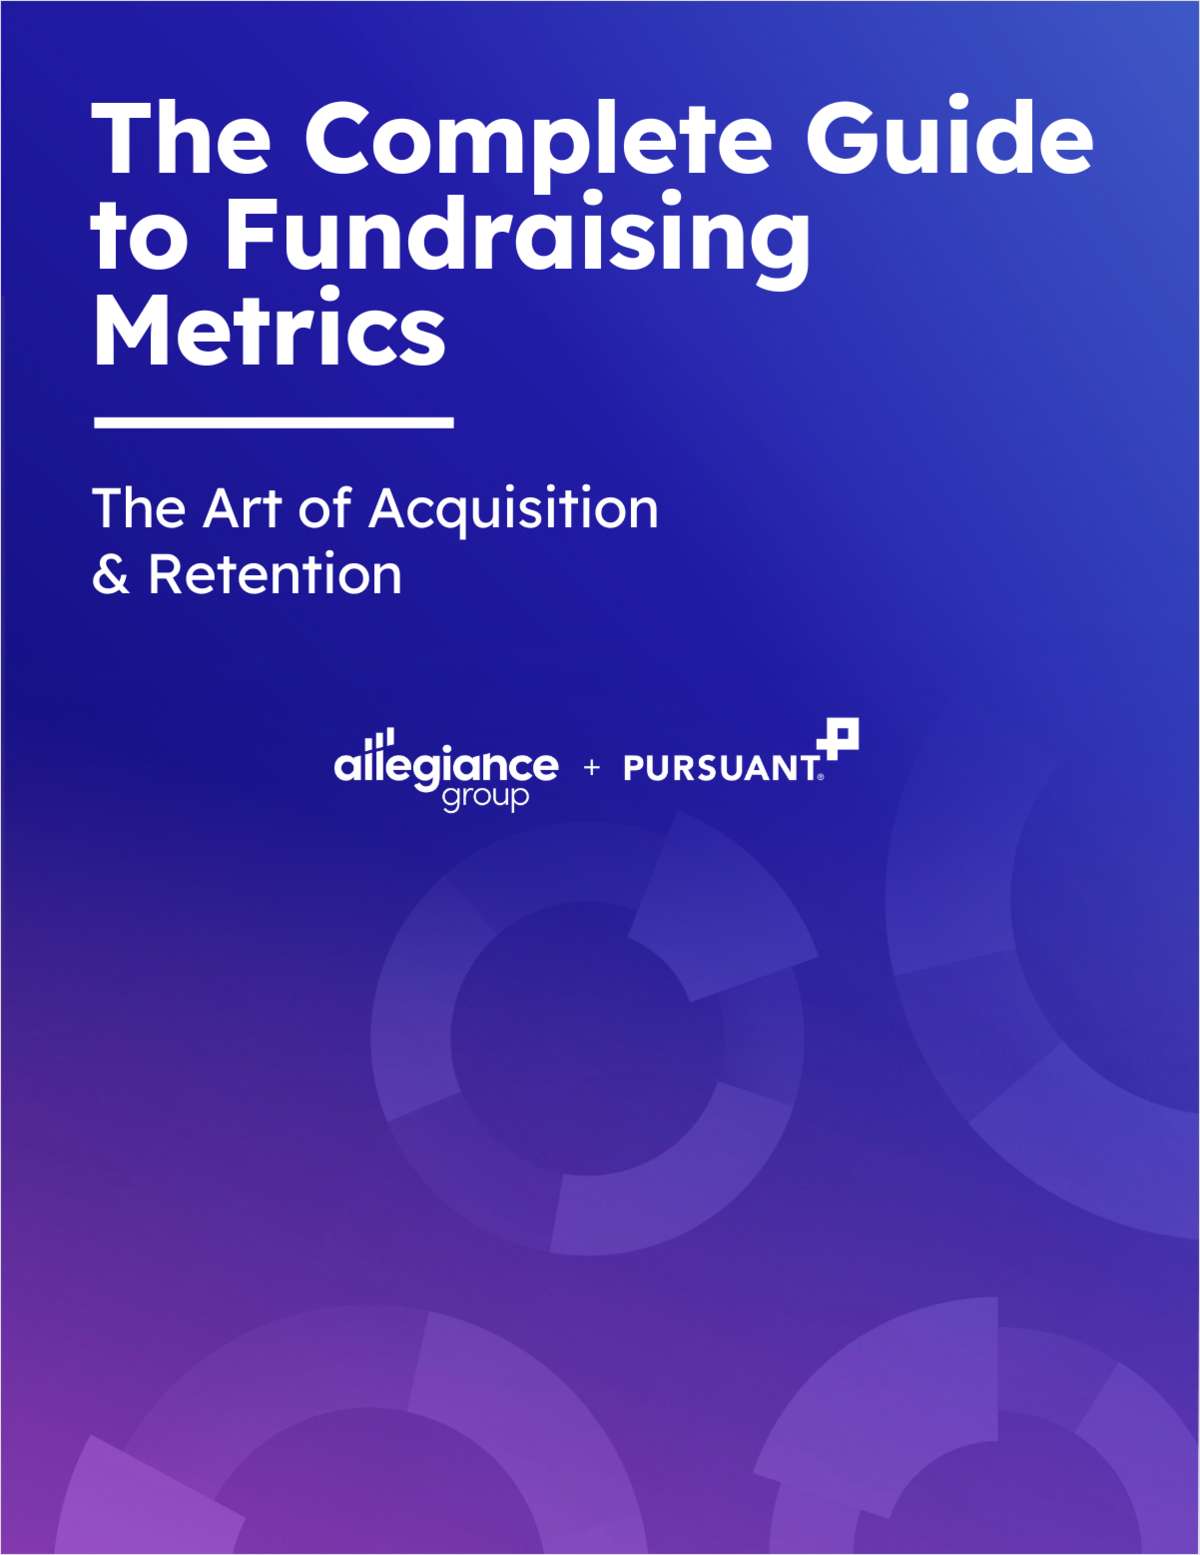 The Complete Guide to Fundraising Metrics